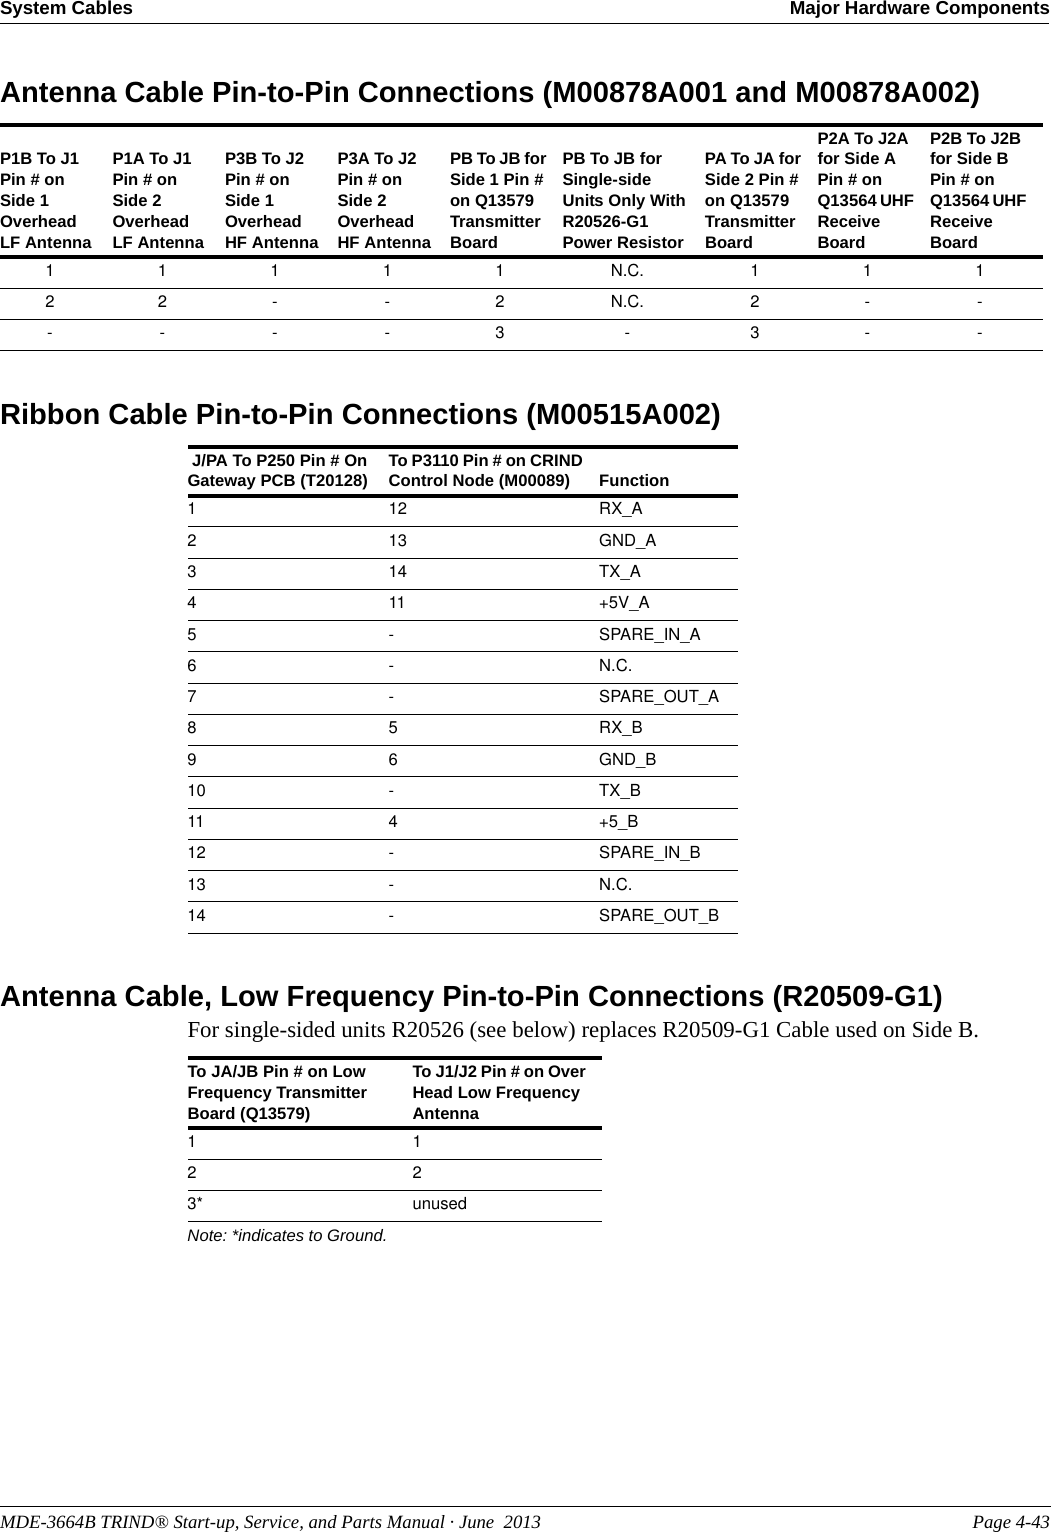 MDE-3664B TRIND® Start-up, Service, and Parts Manual · June  2013 Page 4-43System Cables Major Hardware ComponentsAntenna Cable Pin-to-Pin Connections (M00878A001 and M00878A002) P1B To J1 Pin # on Side 1 Overhead LF AntennaP1A To J1 Pin # on Side 2 Overhead LF AntennaP3B To J2 Pin # on Side 1 Overhead HF AntennaP3A To J2 Pin # on Side 2 Overhead HF AntennaPB To JB for Side 1 Pin # on Q13579 Transmitter BoardPB To JB for Single-side Units Only With R20526-G1 Power Resistor PA To JA for Side 2 Pin # on Q13579 Transmitter BoardP2A To J2A for Side A Pin # on Q13564 UHF Receive BoardP2B To J2B for Side B Pin # on Q13564 UHF Receive Board11111 N.C. 1112 2 - - 2 N.C. 2 - -- - - - 3 - 3 - -Ribbon Cable Pin-to-Pin Connections (M00515A002) J/PA To P250 Pin # On Gateway PCB (T20128) To P3110 Pin # on CRIND Control Node (M00089) Function112 RX_A213 GND_A314 TX_A411 +5V_A5 - SPARE_IN_A6 - N.C.7 - SPARE_OUT_A8 5 RX_B9 6 GND_B10 -TX_B11 4+5_B12 -SPARE_IN_B13 -N.C.14 -SPARE_OUT_BAntenna Cable, Low Frequency Pin-to-Pin Connections (R20509-G1)For single-sided units R20526 (see below) replaces R20509-G1 Cable used on Side B.To JA/JB Pin # on Low Frequency Transmitter Board (Q13579)To J1/J2 Pin # on Over Head Low Frequency Antenna1 12 23* unusedNote: *indicates to Ground.